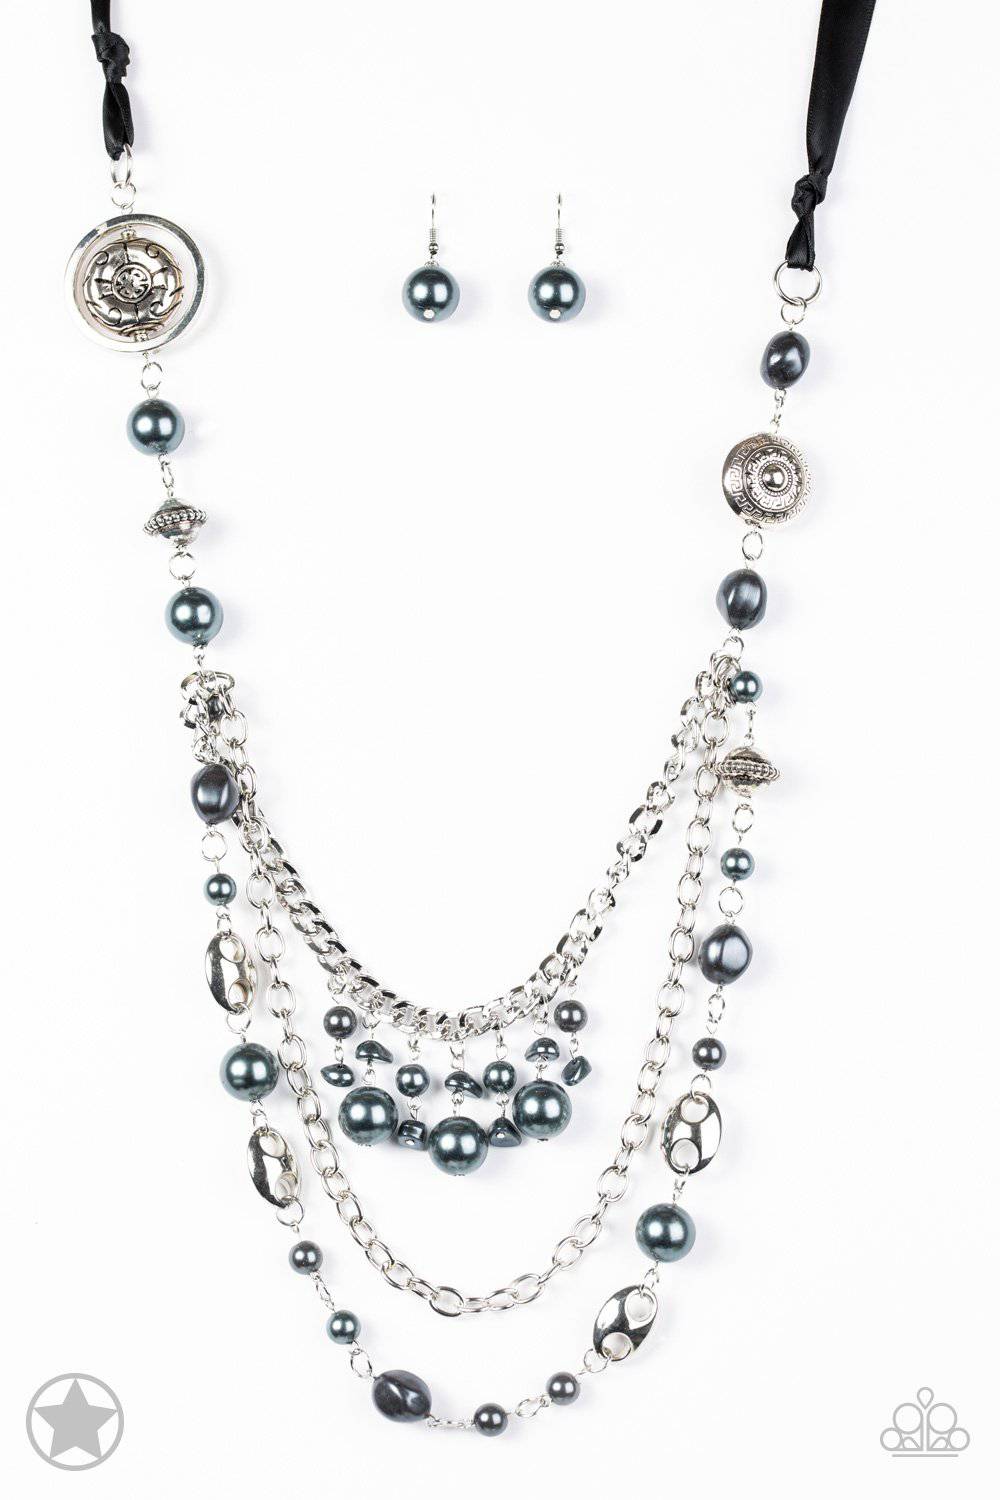 All The Trimmings - Black Pearl Necklace - Paparazzi Accessories - GlaMarous Titi Jewels